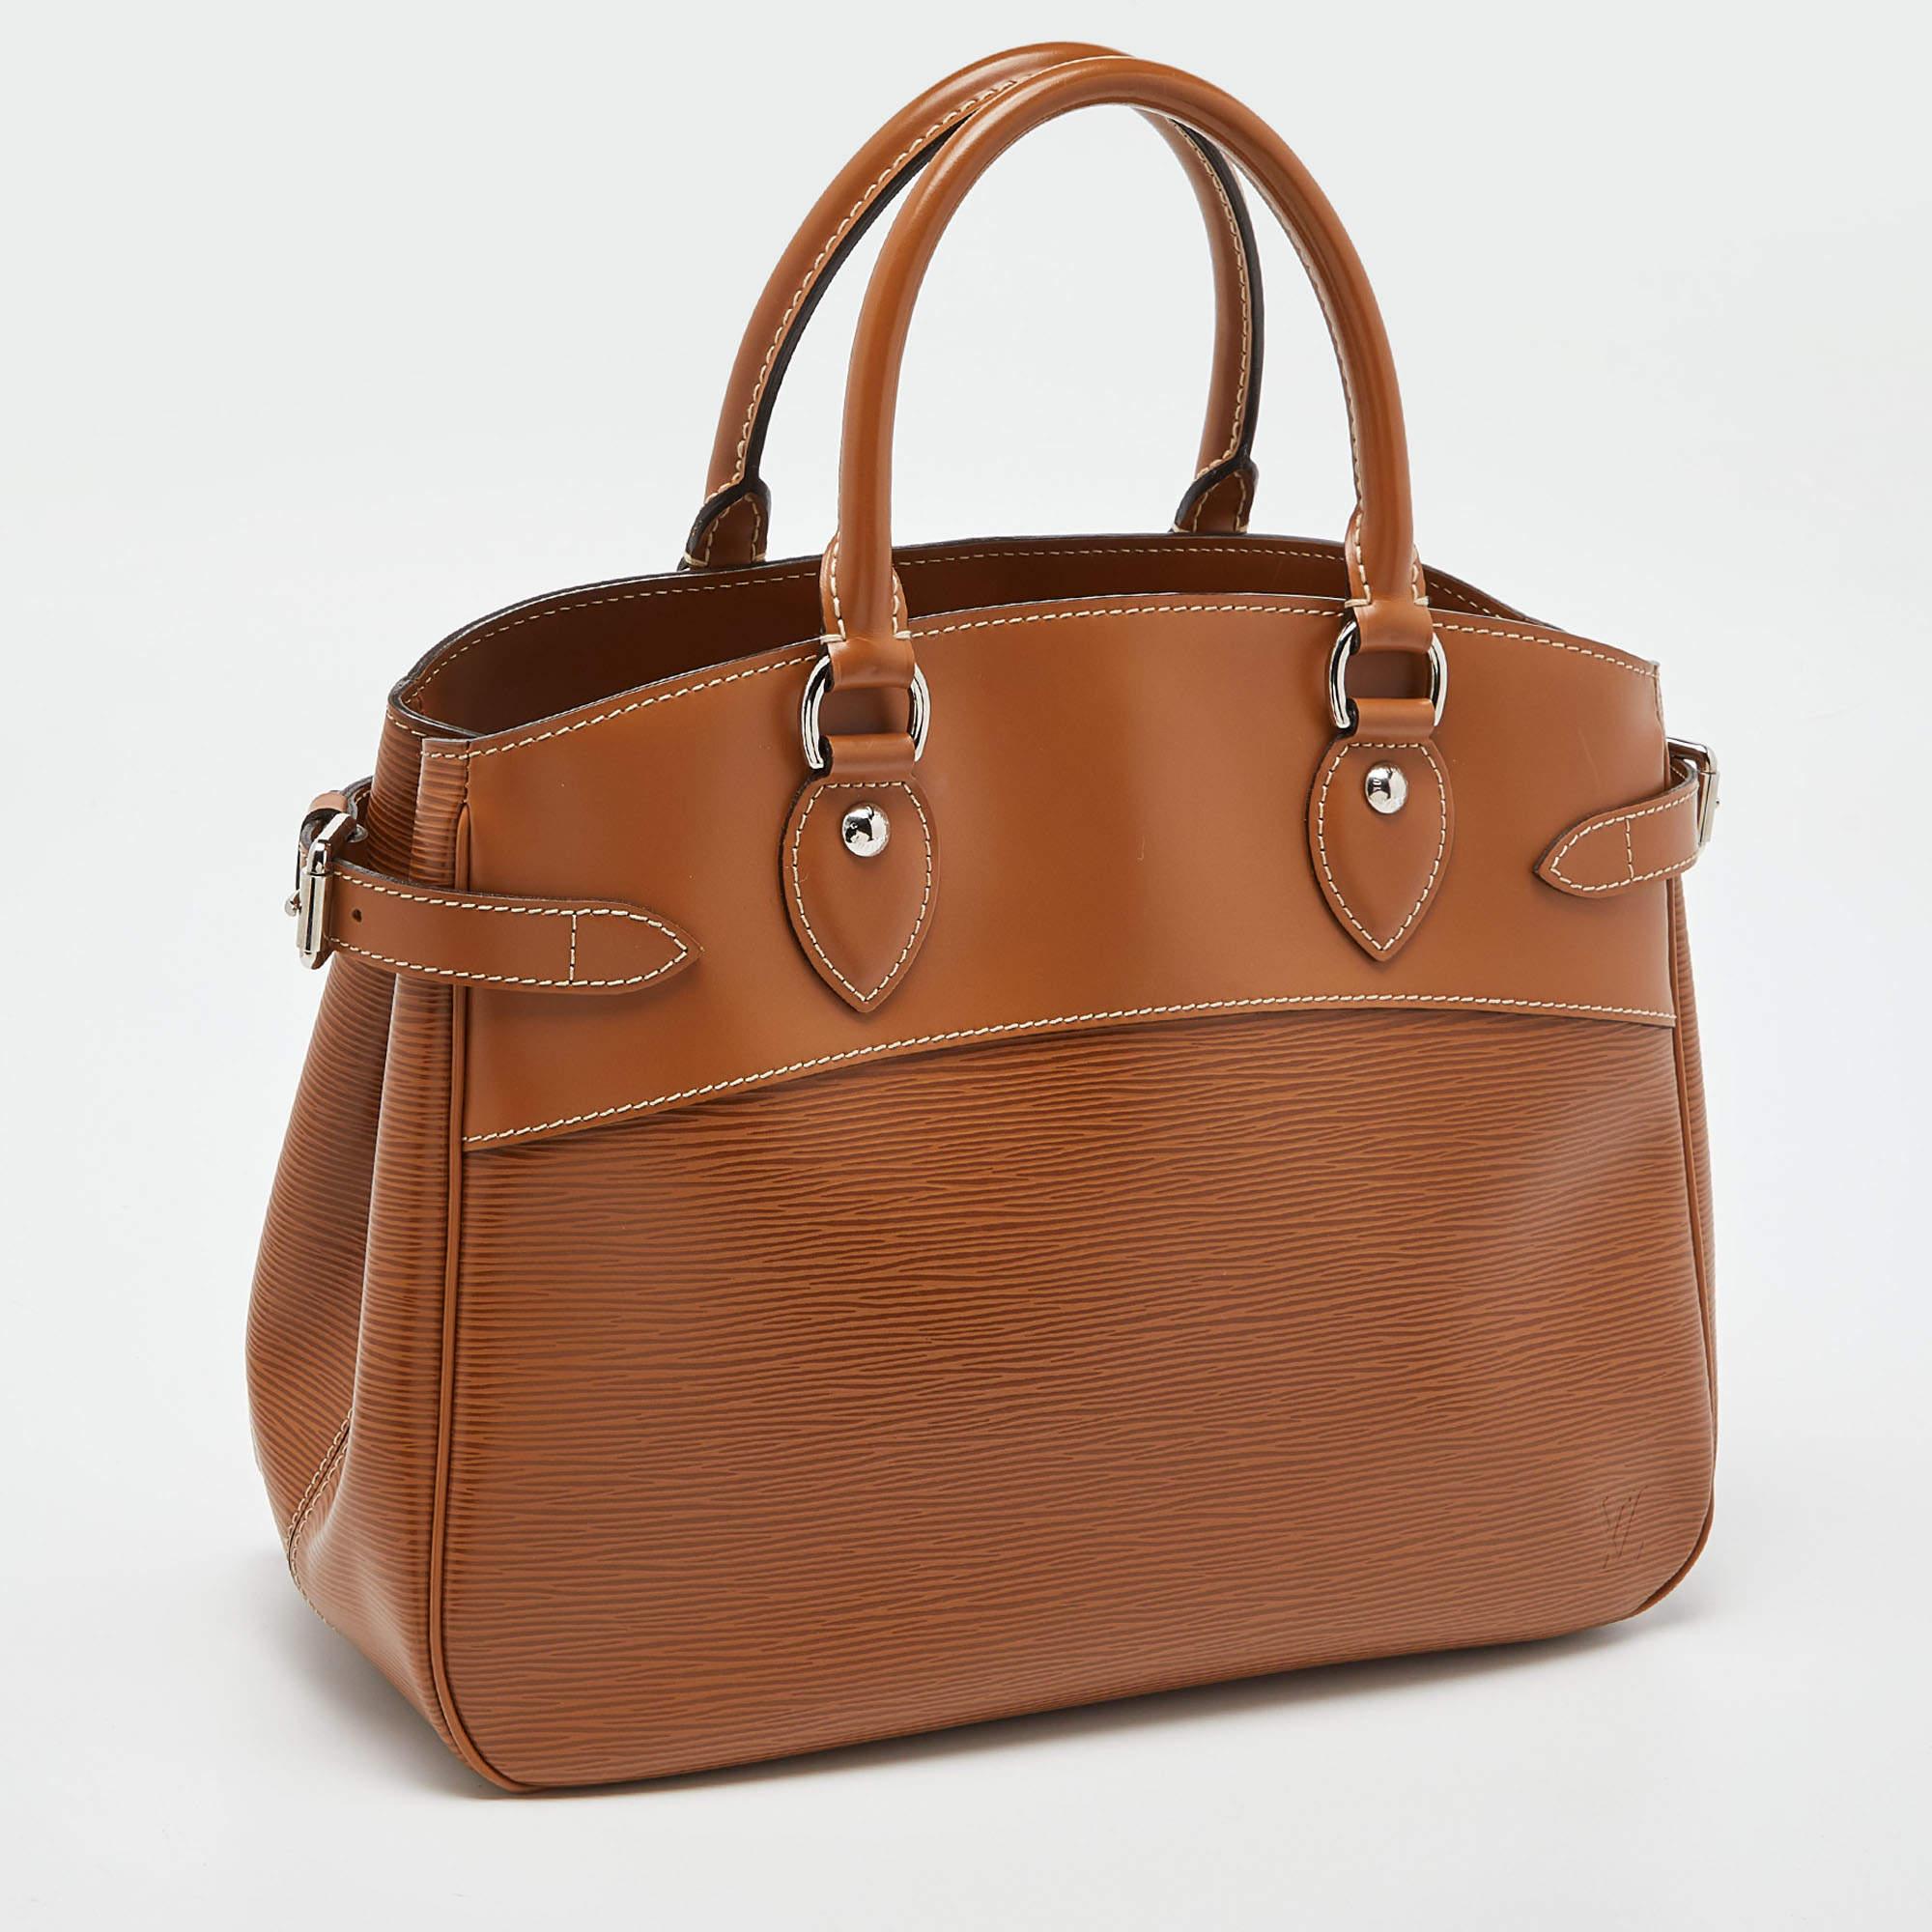 Accent a work outfit with this Louis Vuitton Passy bag. It is made from LV's signature Epi leather and features side buckle detailing, rolled leather handles, and a classy structure. The bag comes with a fabric-lined interior.

